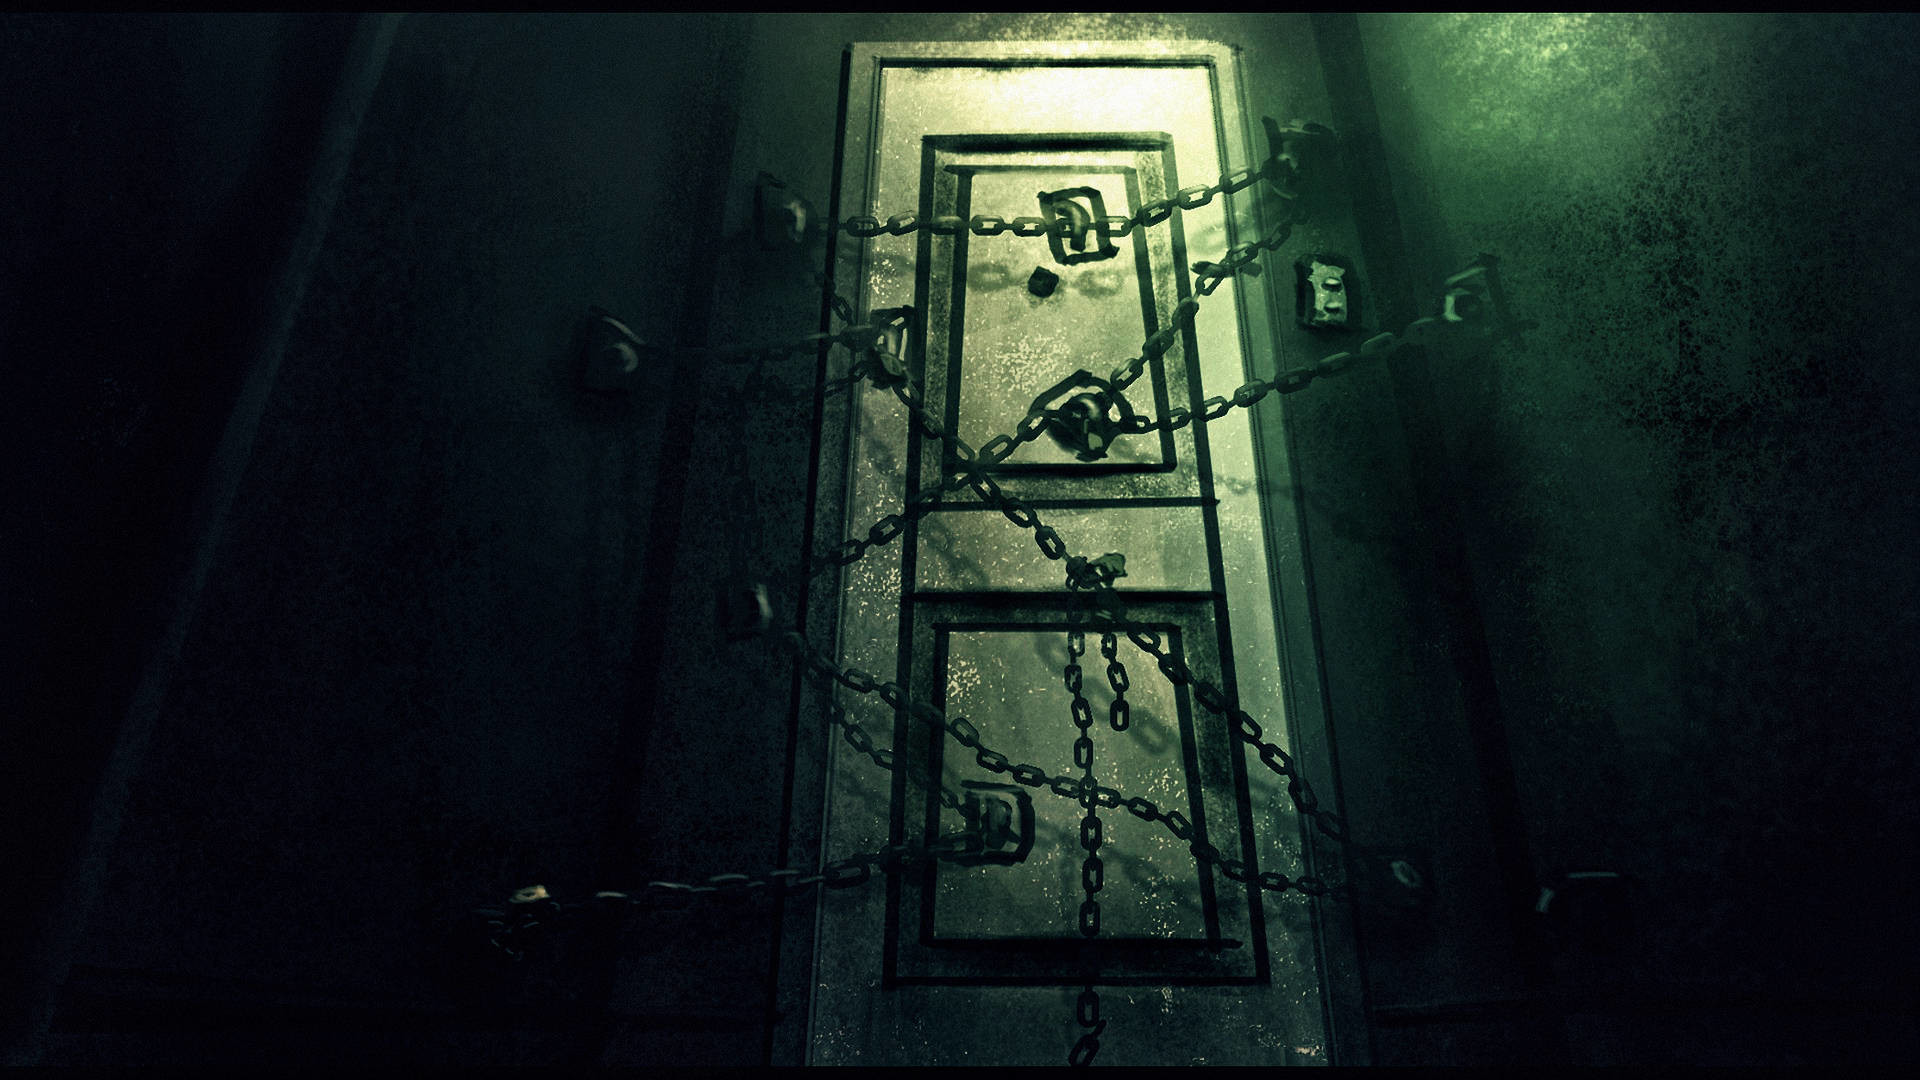 1920x1080 px] Free Wallpapers : Horror Video Games Silent Hill Artwork Silent Hill  Chains Doors New High Definition Wallpaper